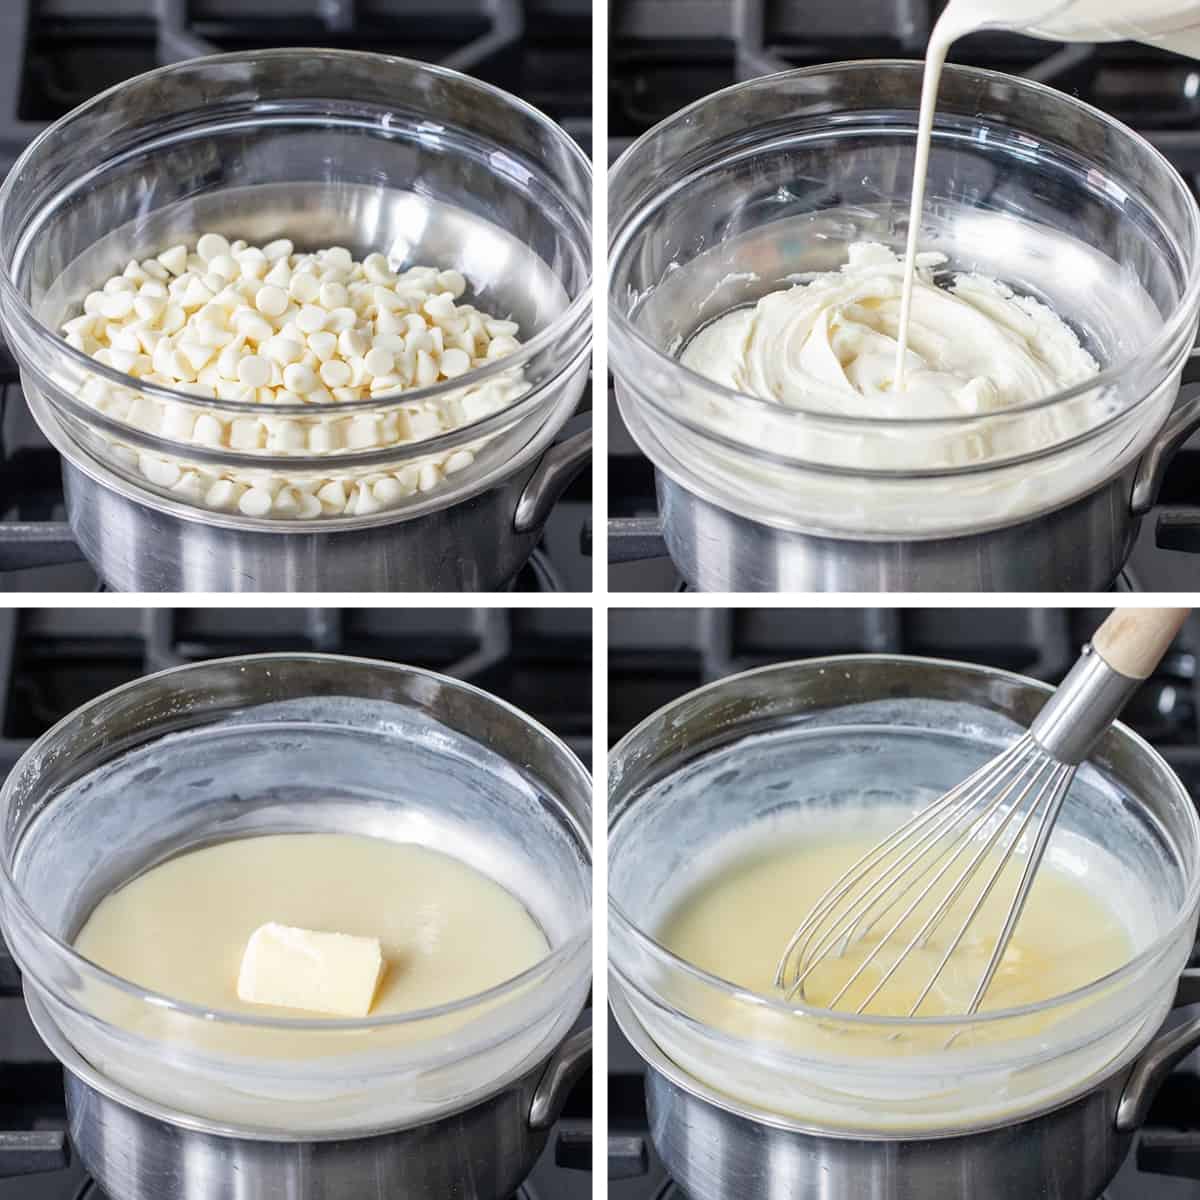 Steps for adding white chocolate chips, cream, butter, and whisking over heat to make White Chocolate Ganache.